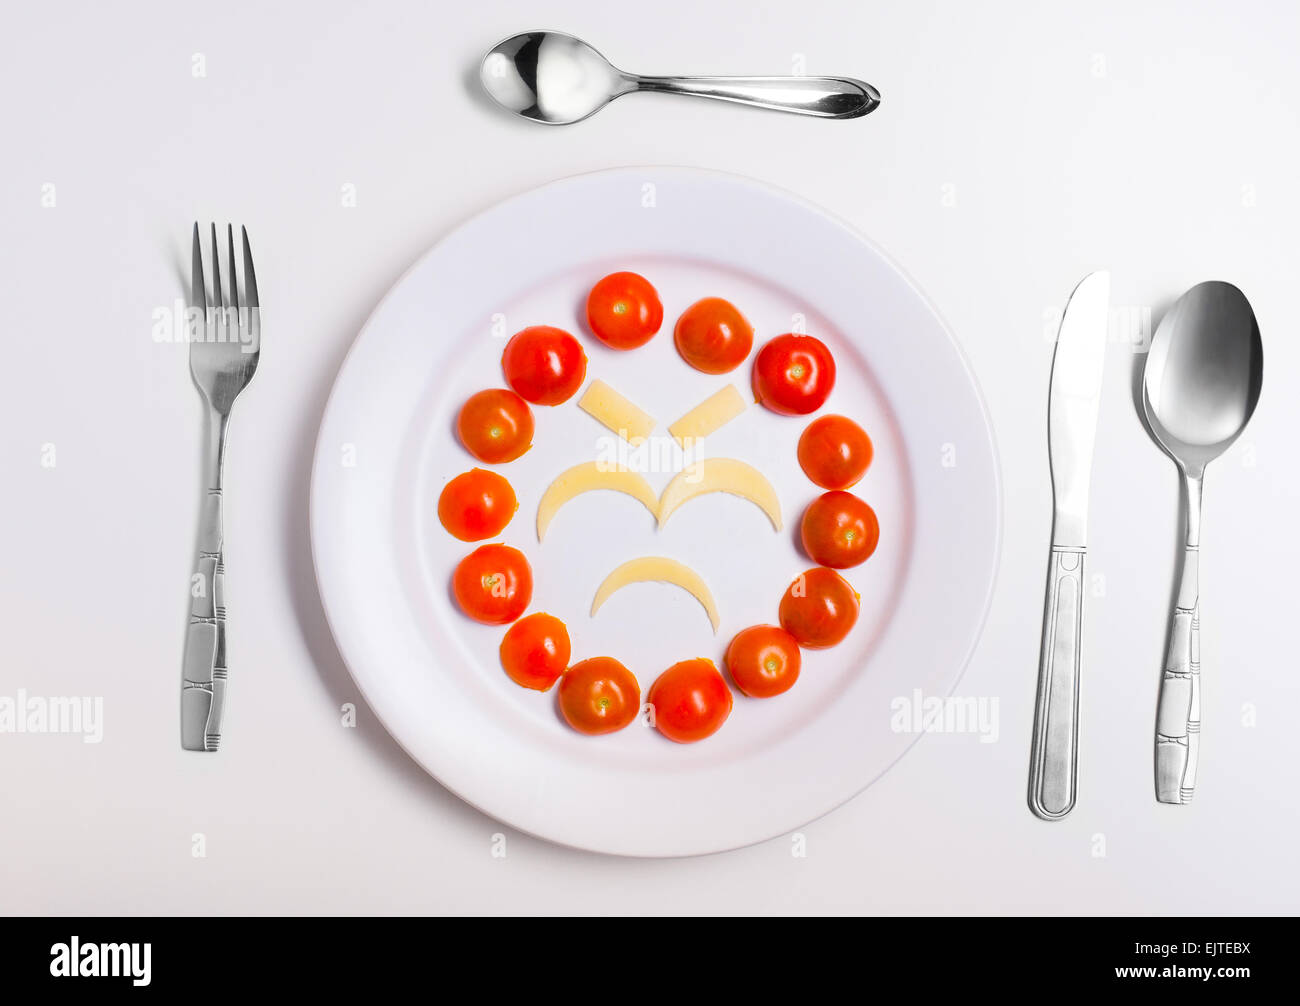 angry and disappointed emoticon food, made from cheese and tomatoes, on a plate with cutlery, isolated Stock Photo